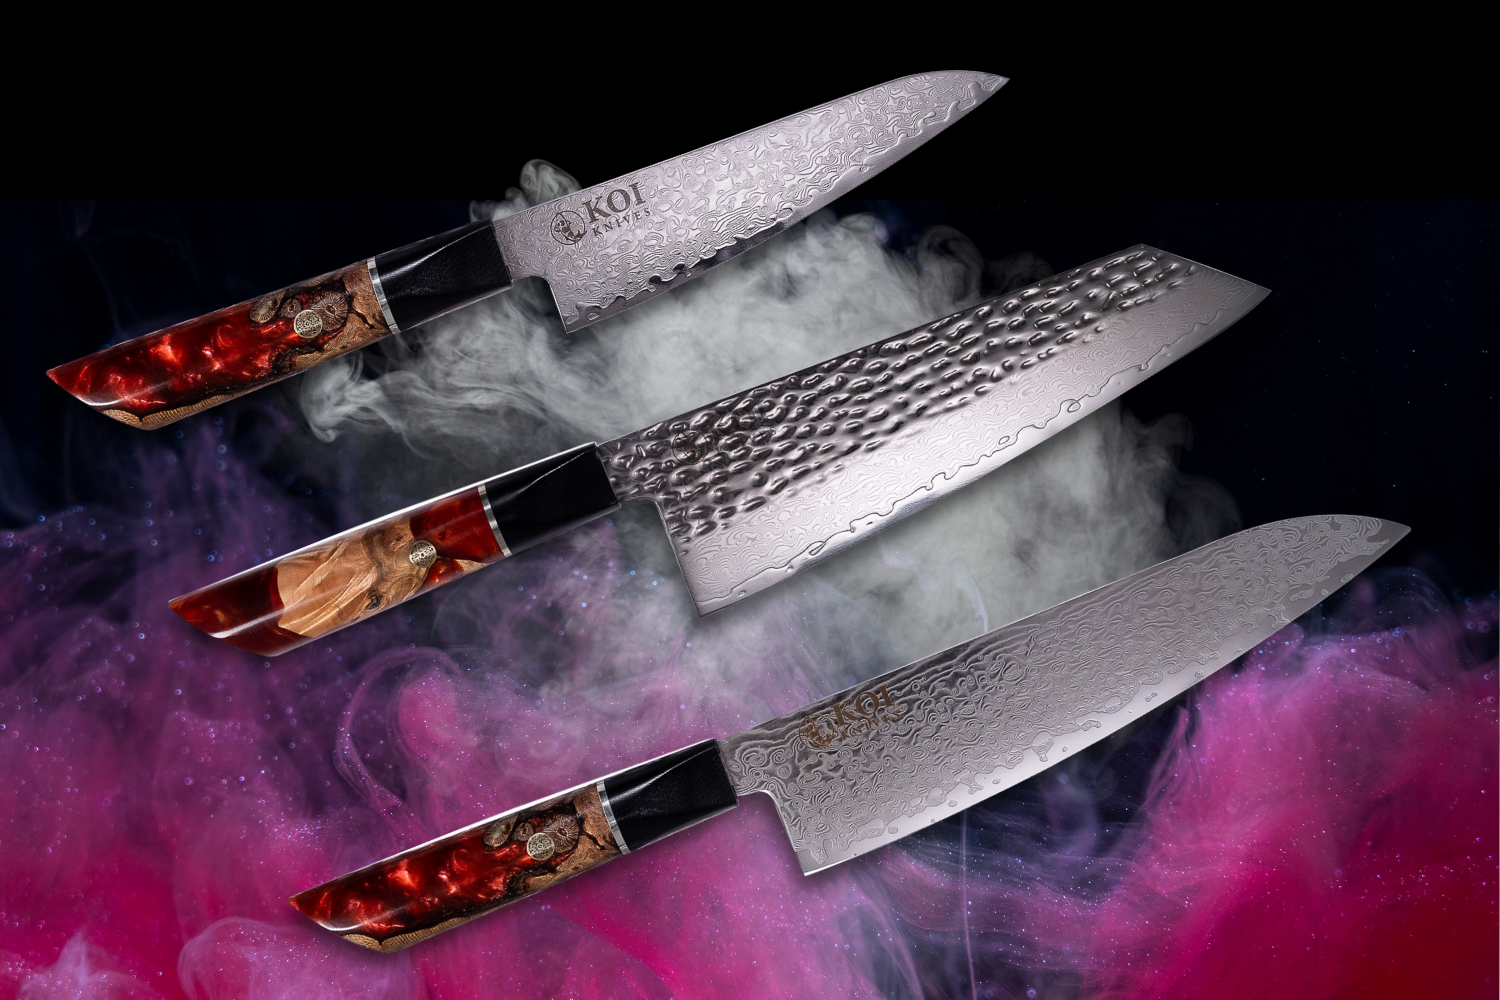 Cutting through the mystery: 14 knife superstitions you need to know